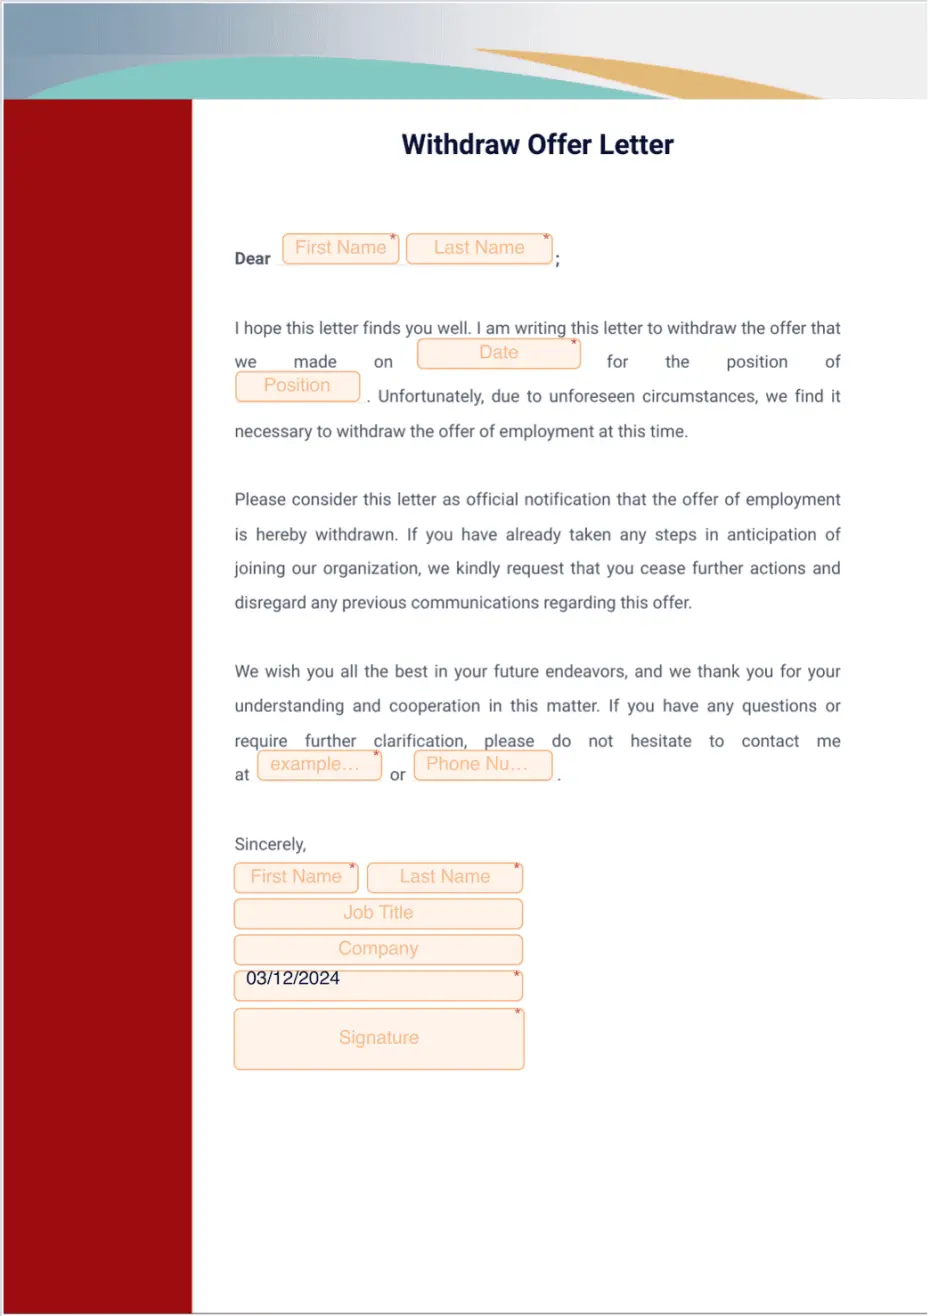 Withdraw Offer Letter Sign Templates Jotform 0117